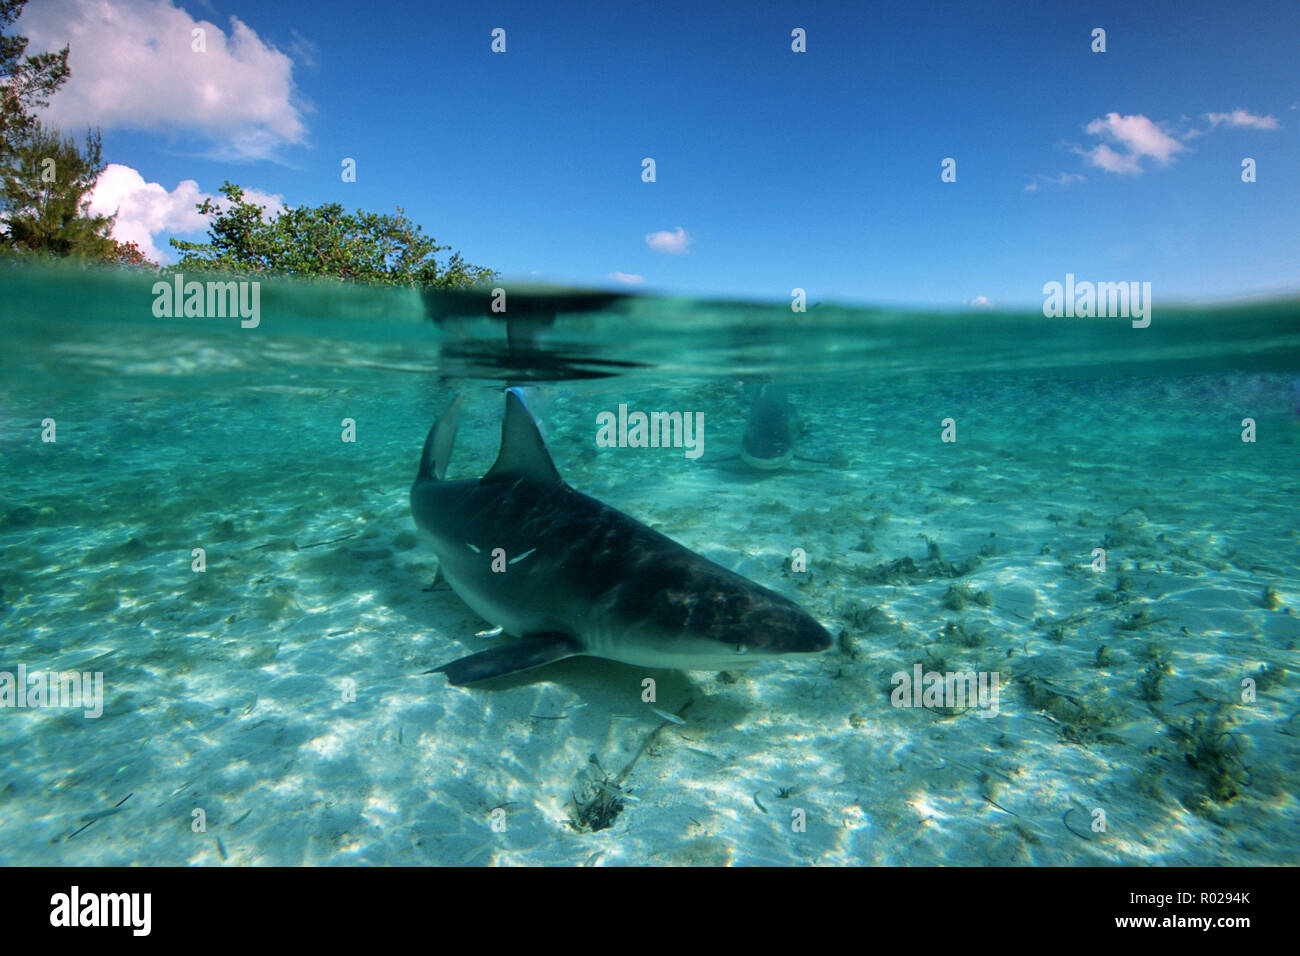 Blacktip shark, Carcharhinus limbatus, can be found in shallow water where they prey on small fishes and squid, Walker's Cay, Bahamas Islands, Atlanti Stock Photo